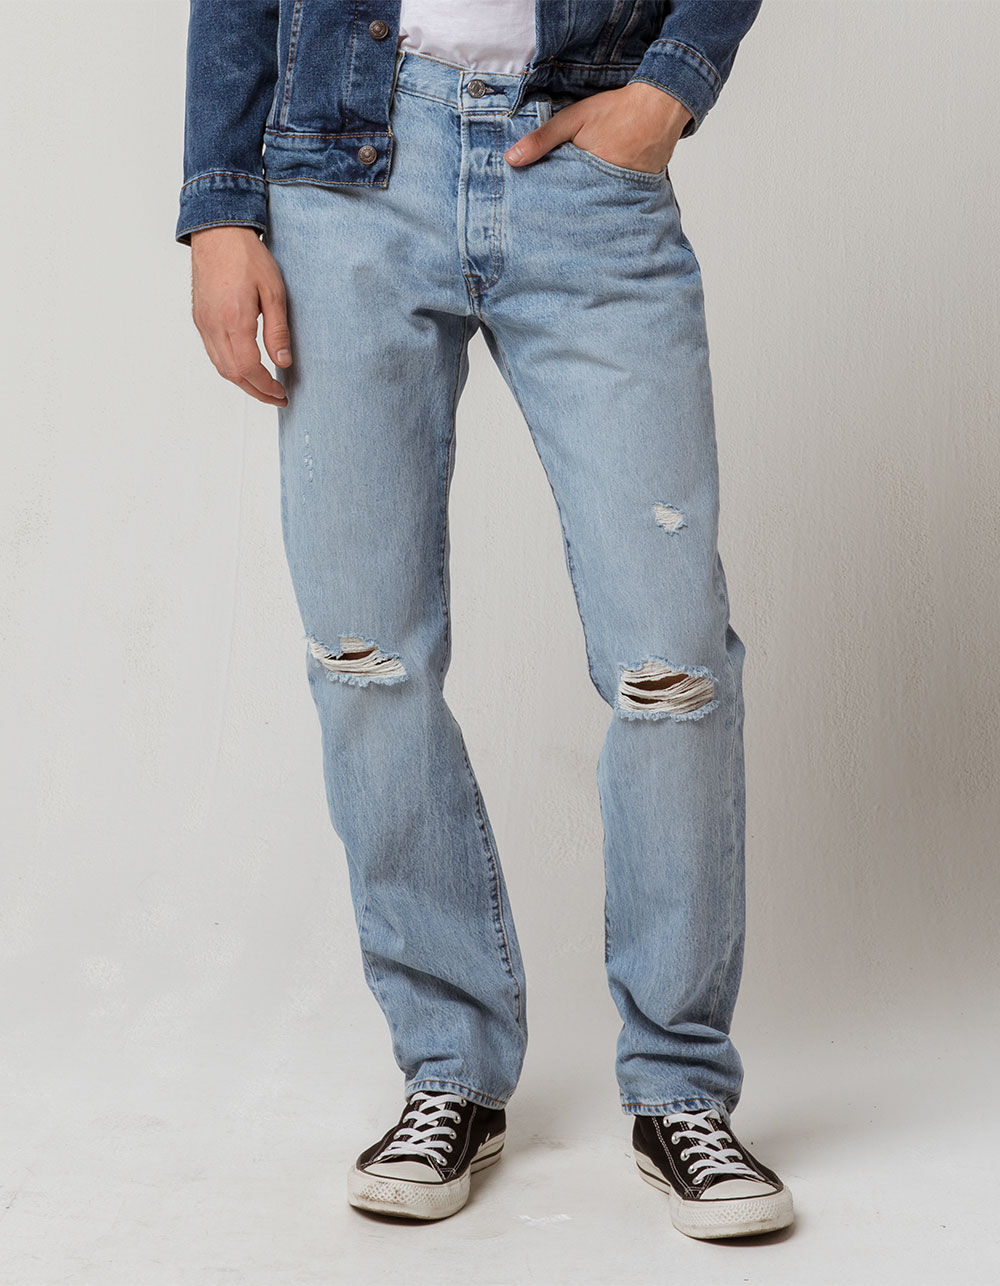 LEVI'S 501 Hector War Mens Ripped Jeans - BLUE | Tillys